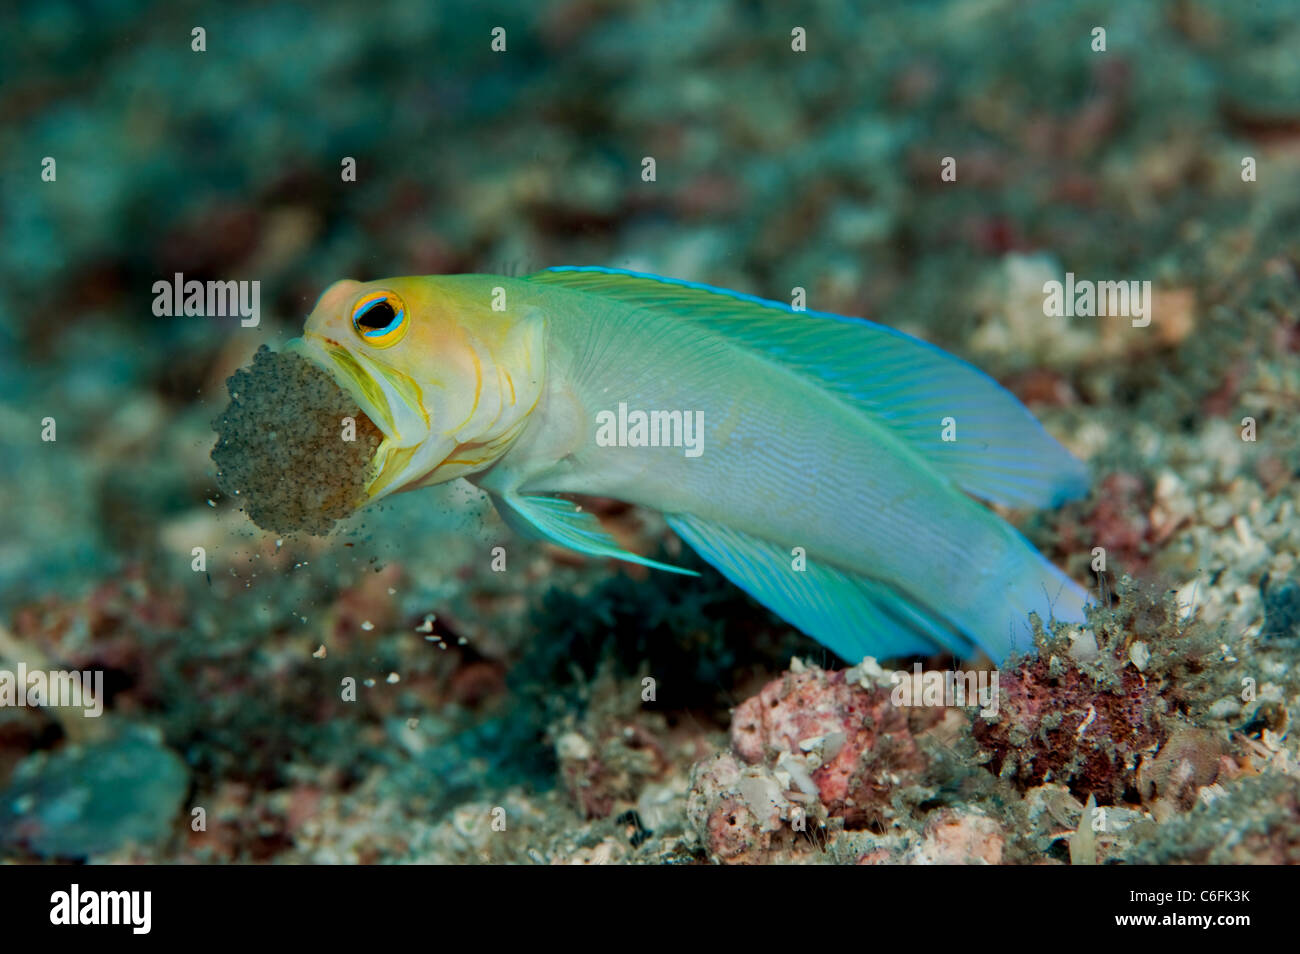 Male Yellowheaded Jawfish, Opistognathus aurifrons, incubating clutch of eggs in his mouth in a coral reef in Palm Beach Florida Stock Photo